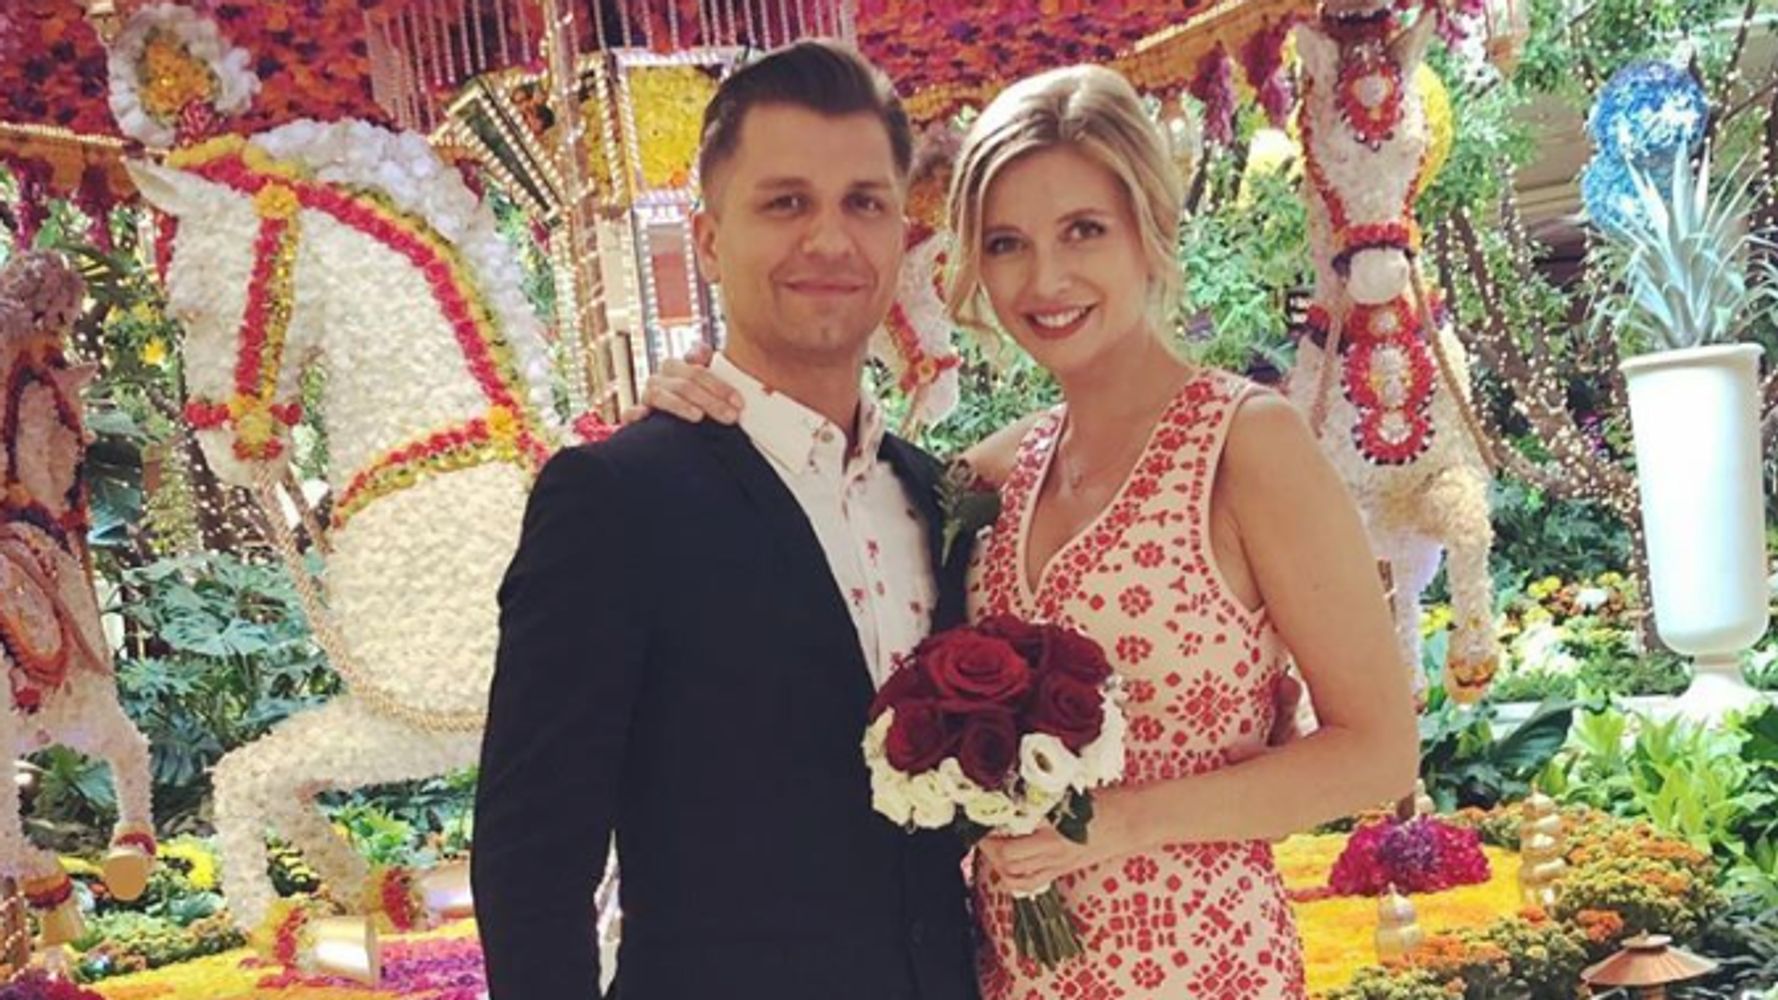 Rachel Riley And Pasha Kovalev Marry In Las Vegas Six Years After Strictly Come Dancing Pairing Huffpost Uk